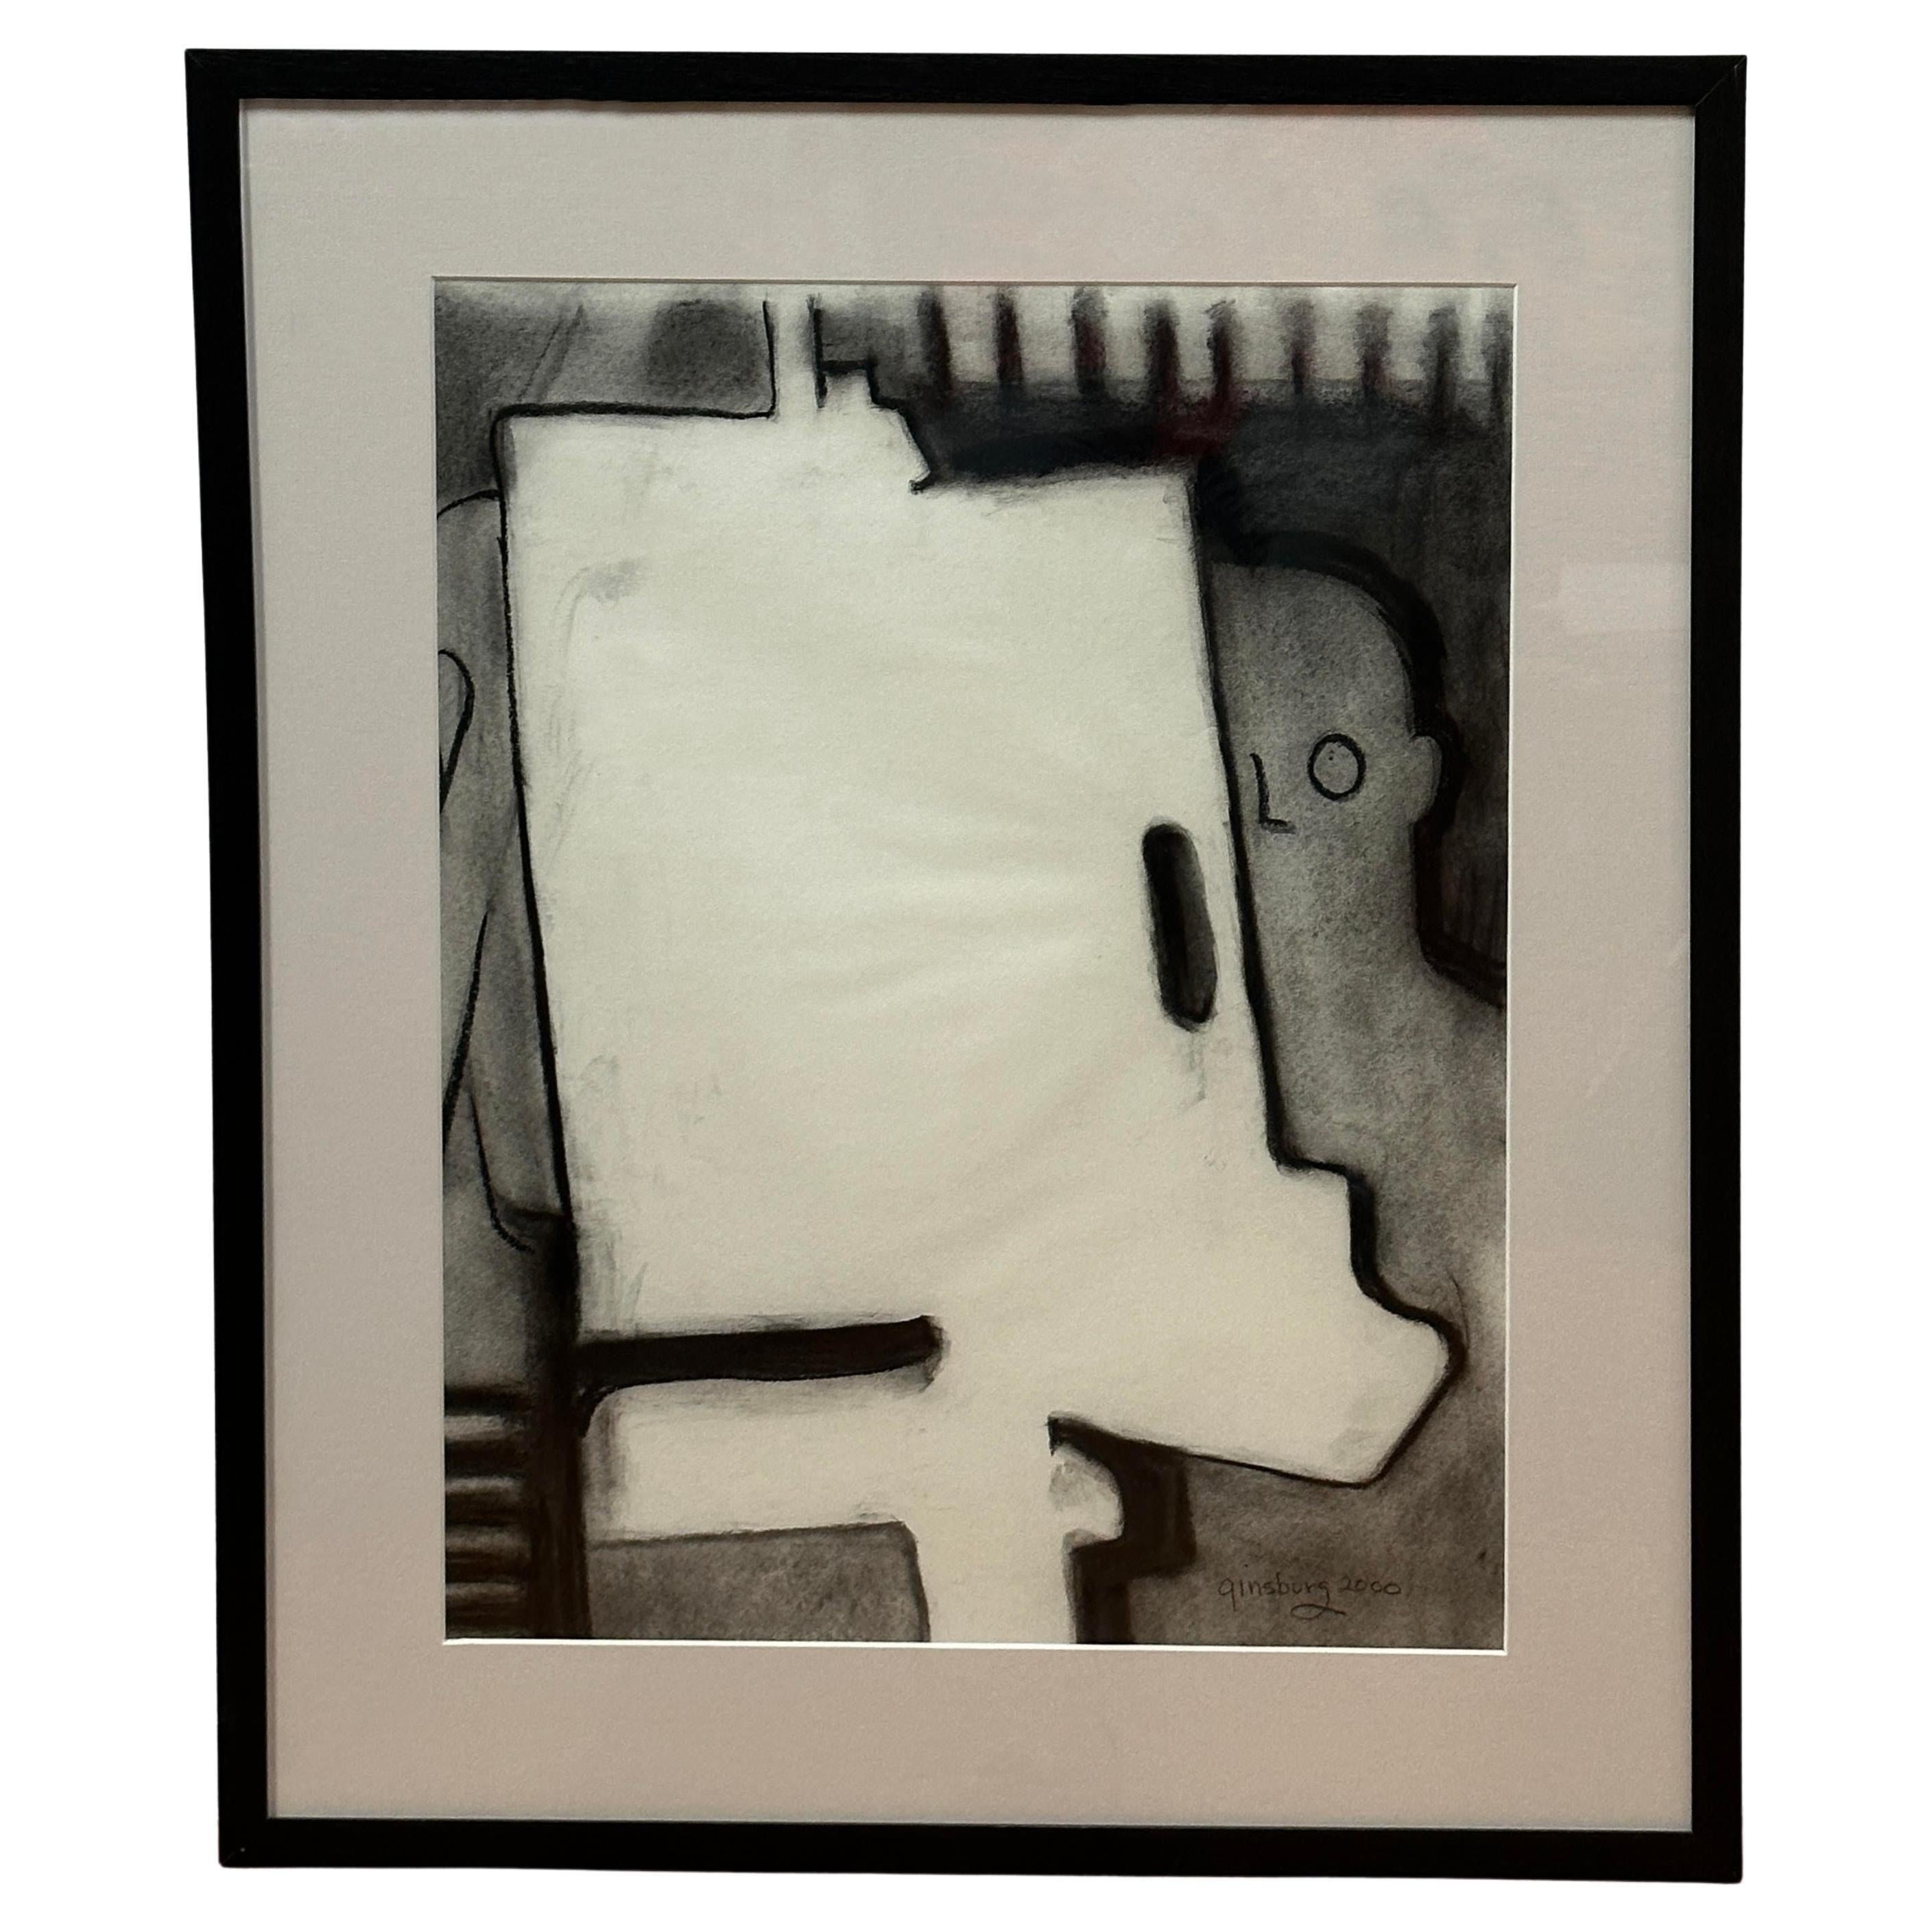 Lorraine Ginsburg was an insightful and prolific artist, born in the Bronx in 1929. She passed away in 2020. 
She experimented extensively, playing with abstract forms or executing multiple studies of a model in charcoal or pencil. Her work was